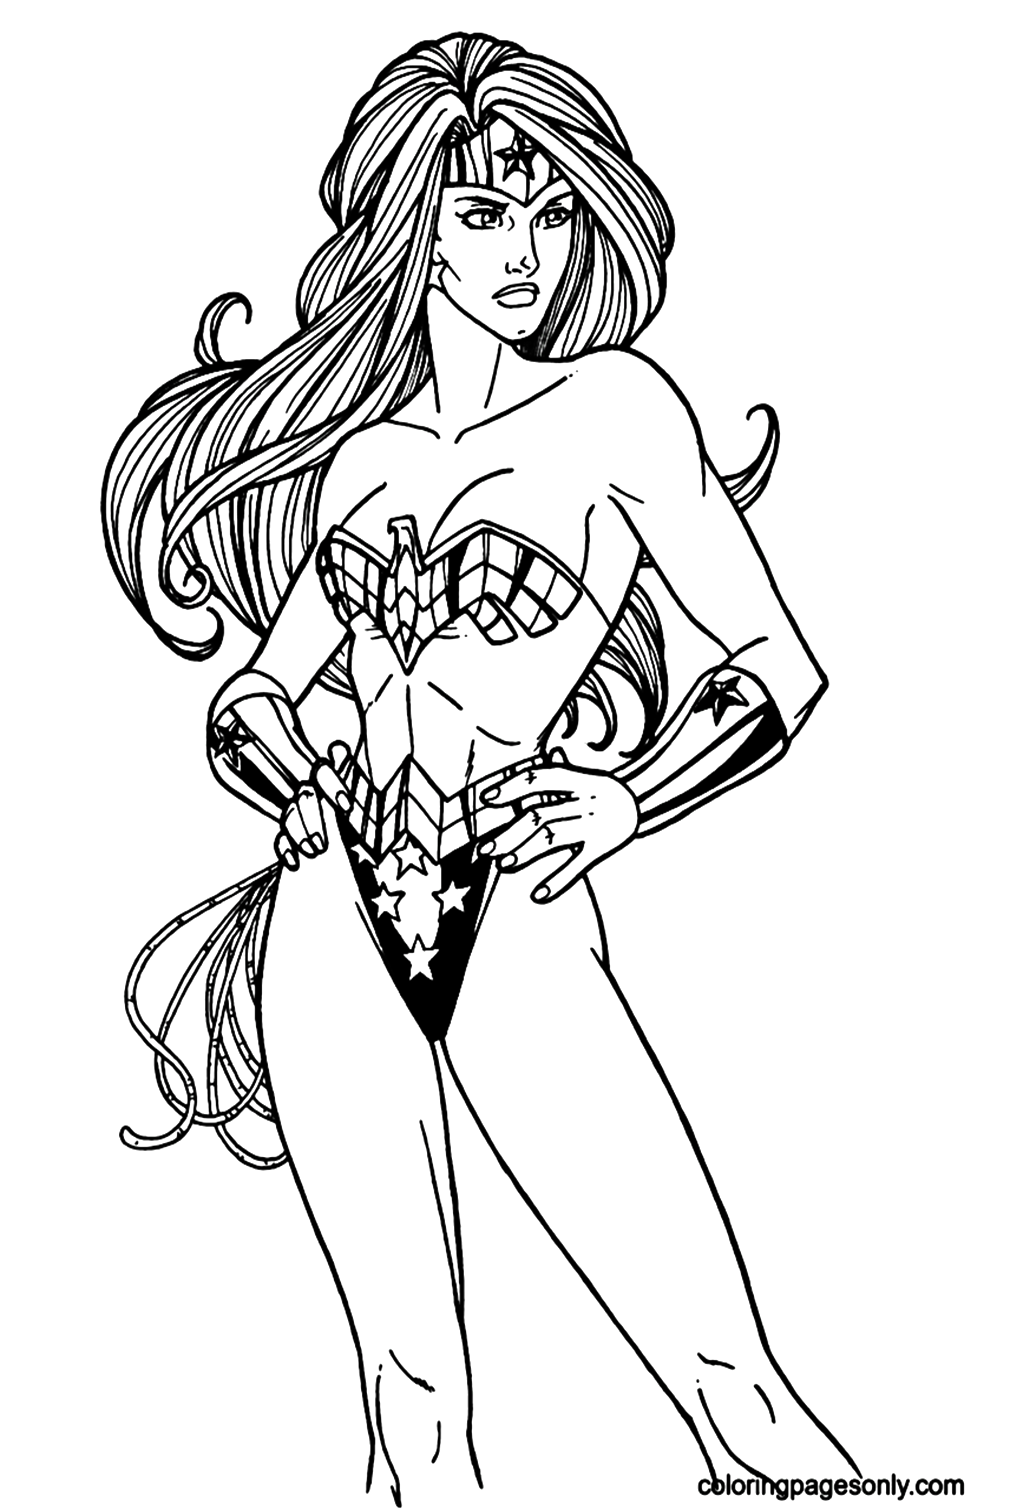 Wonder Woman From DC Comics Coloring Pages